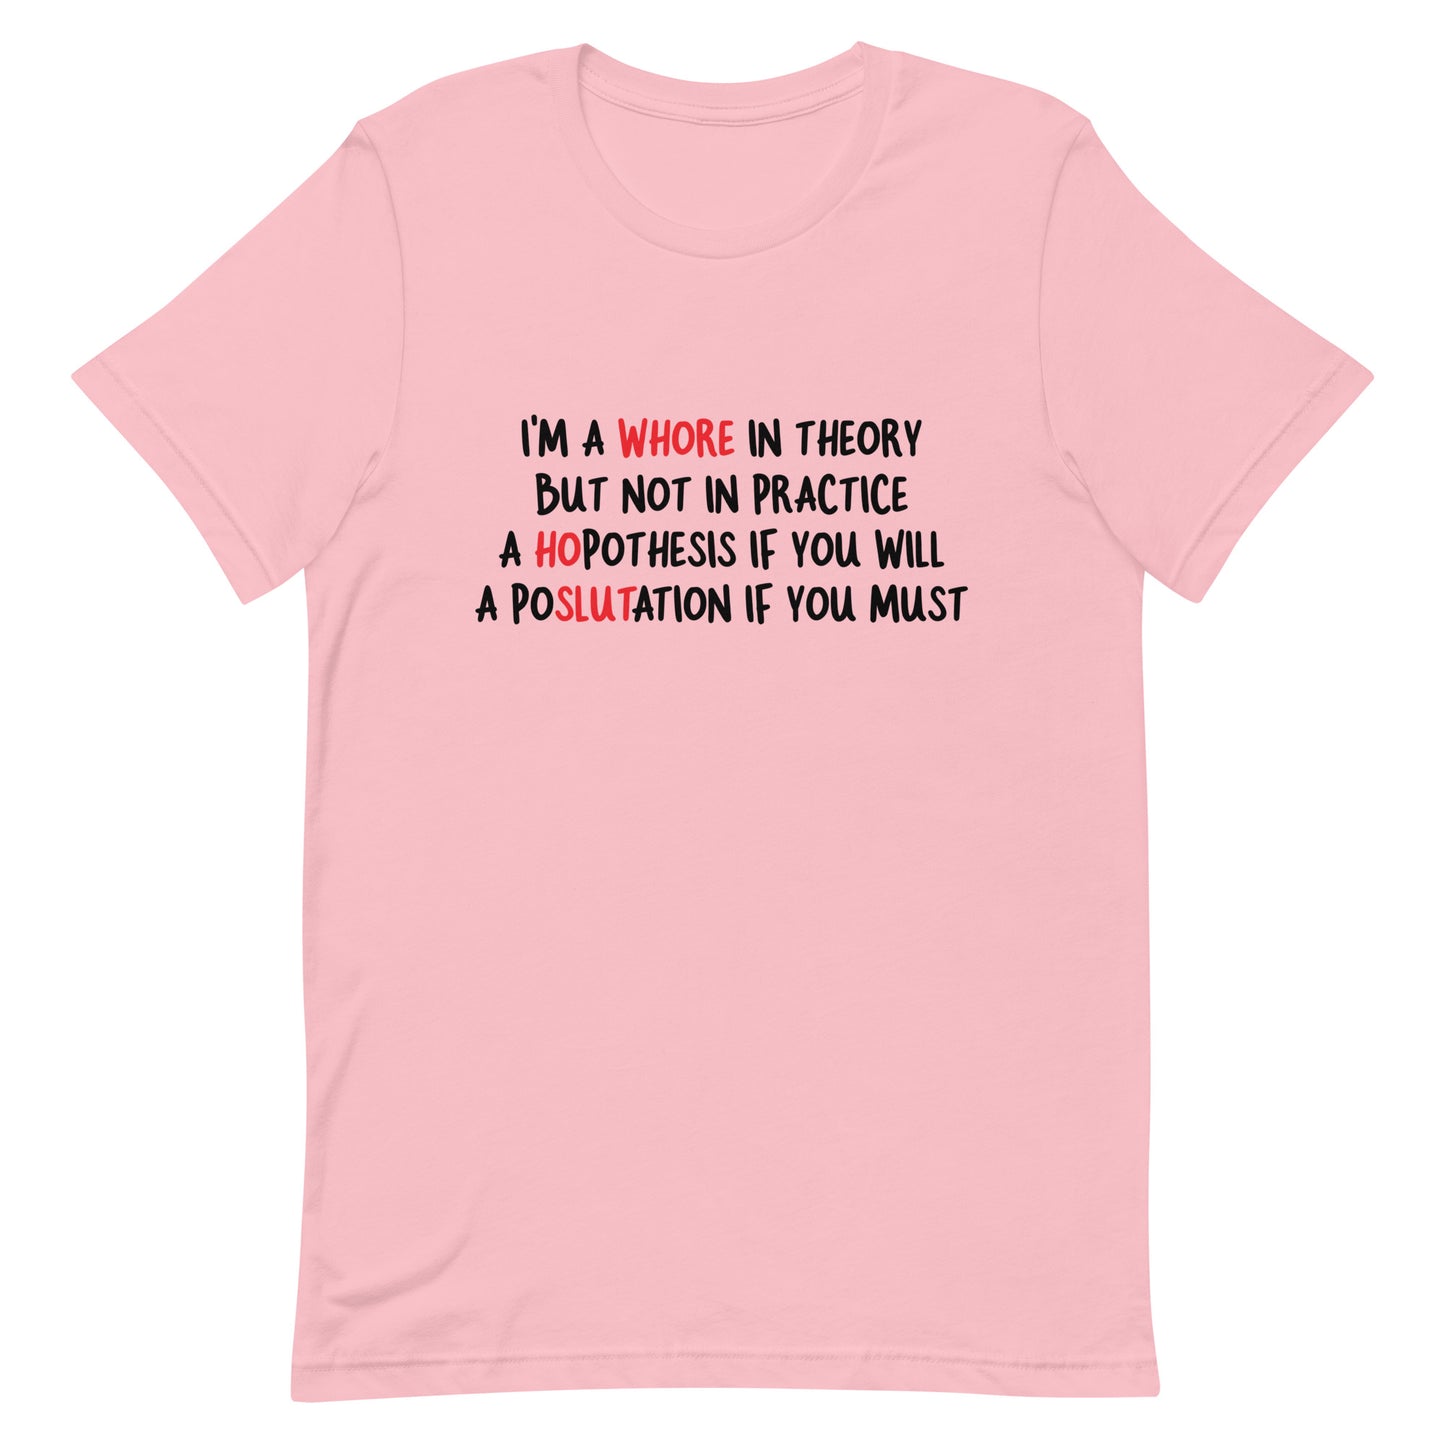 A Whore in Theory but Not in Practice Unisex t-shirt